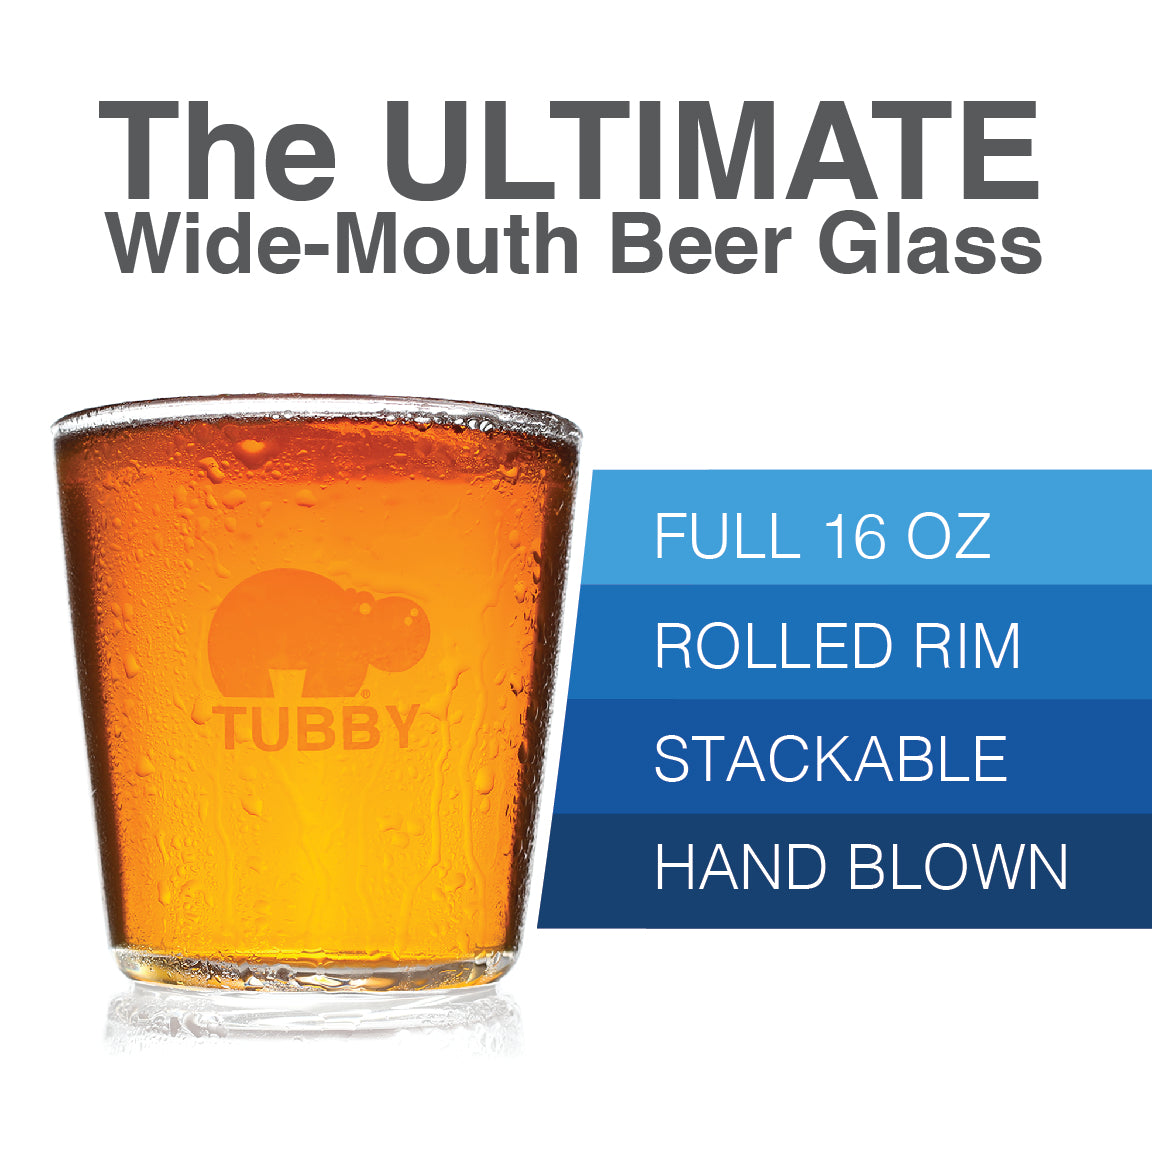 The Tubby - The Ultimate 16 oz Pint Glass (2 Pack)